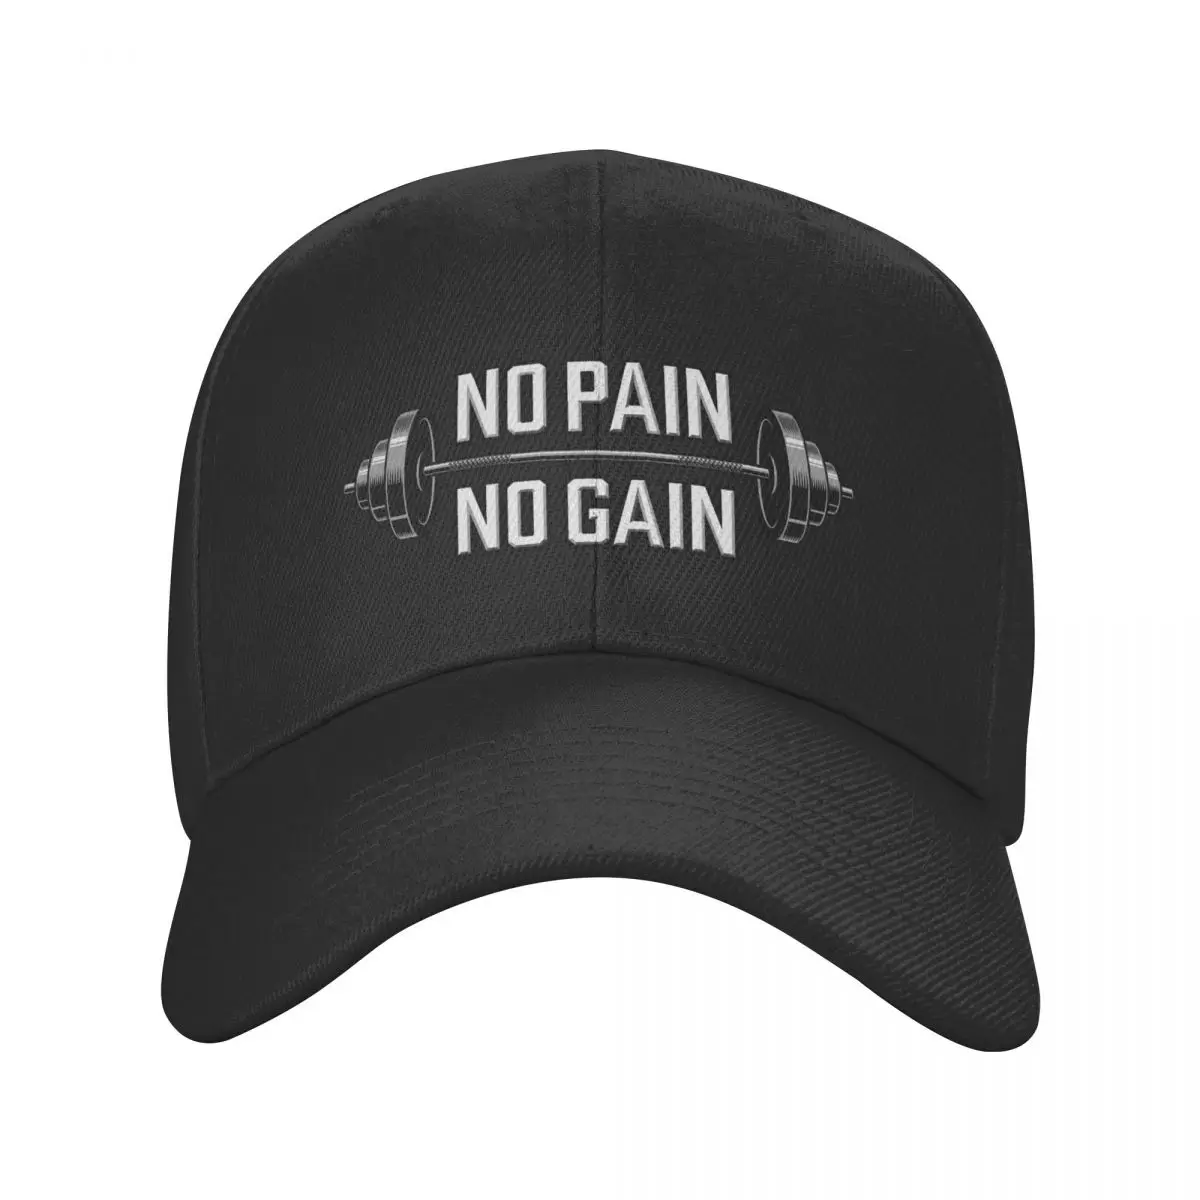 

New No Pain No Gain Gym Motivational Quote Baseball Cap Adult Bodybuilding Workout Adjustable Dad Hat Sports Hats Snapback Caps